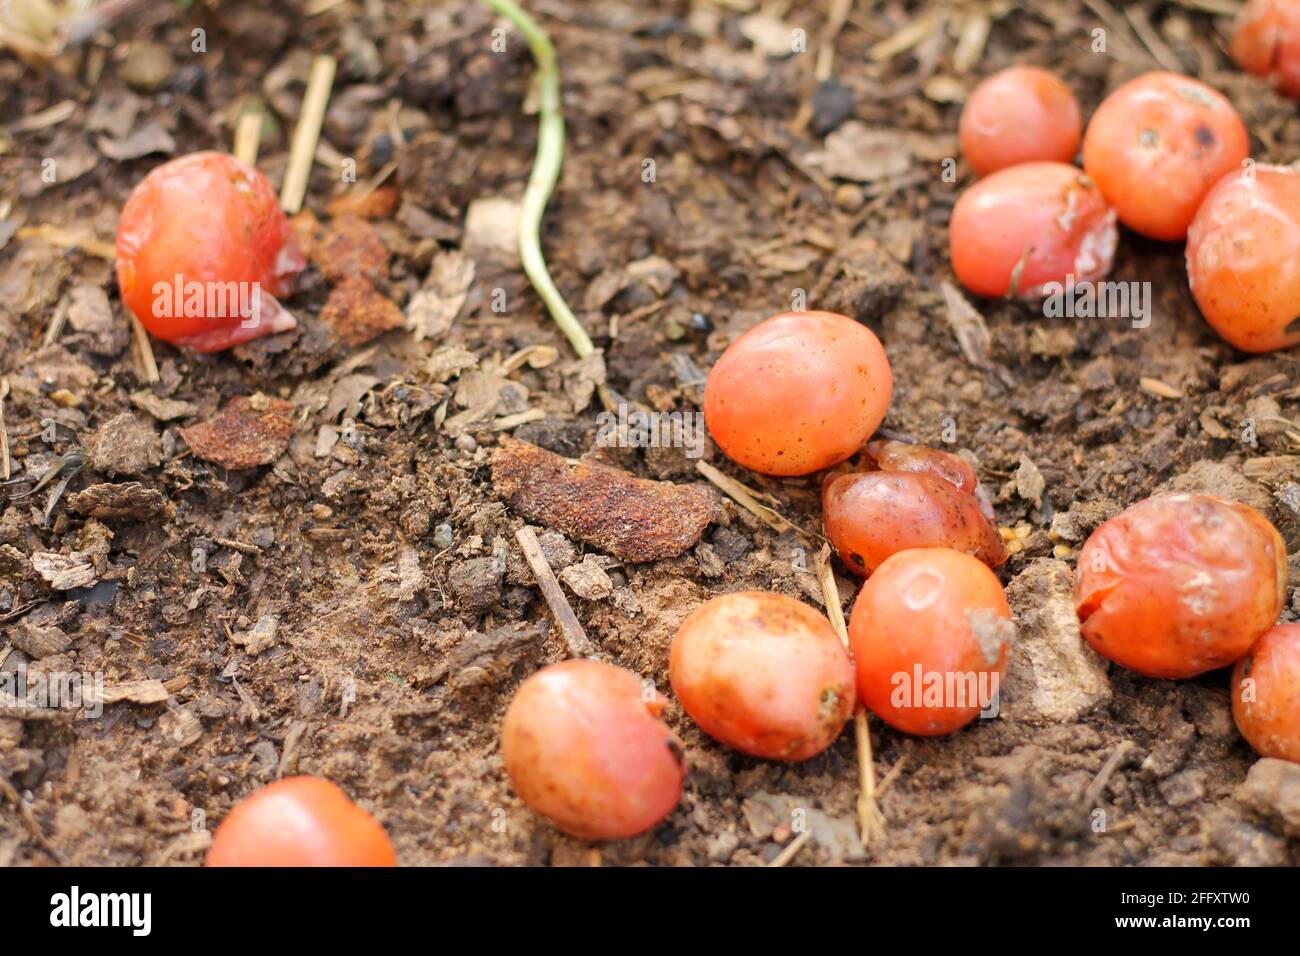 Rotten tomatoes are dropped into the ground in the garden to allow the seeds to germinate. Stock Photo